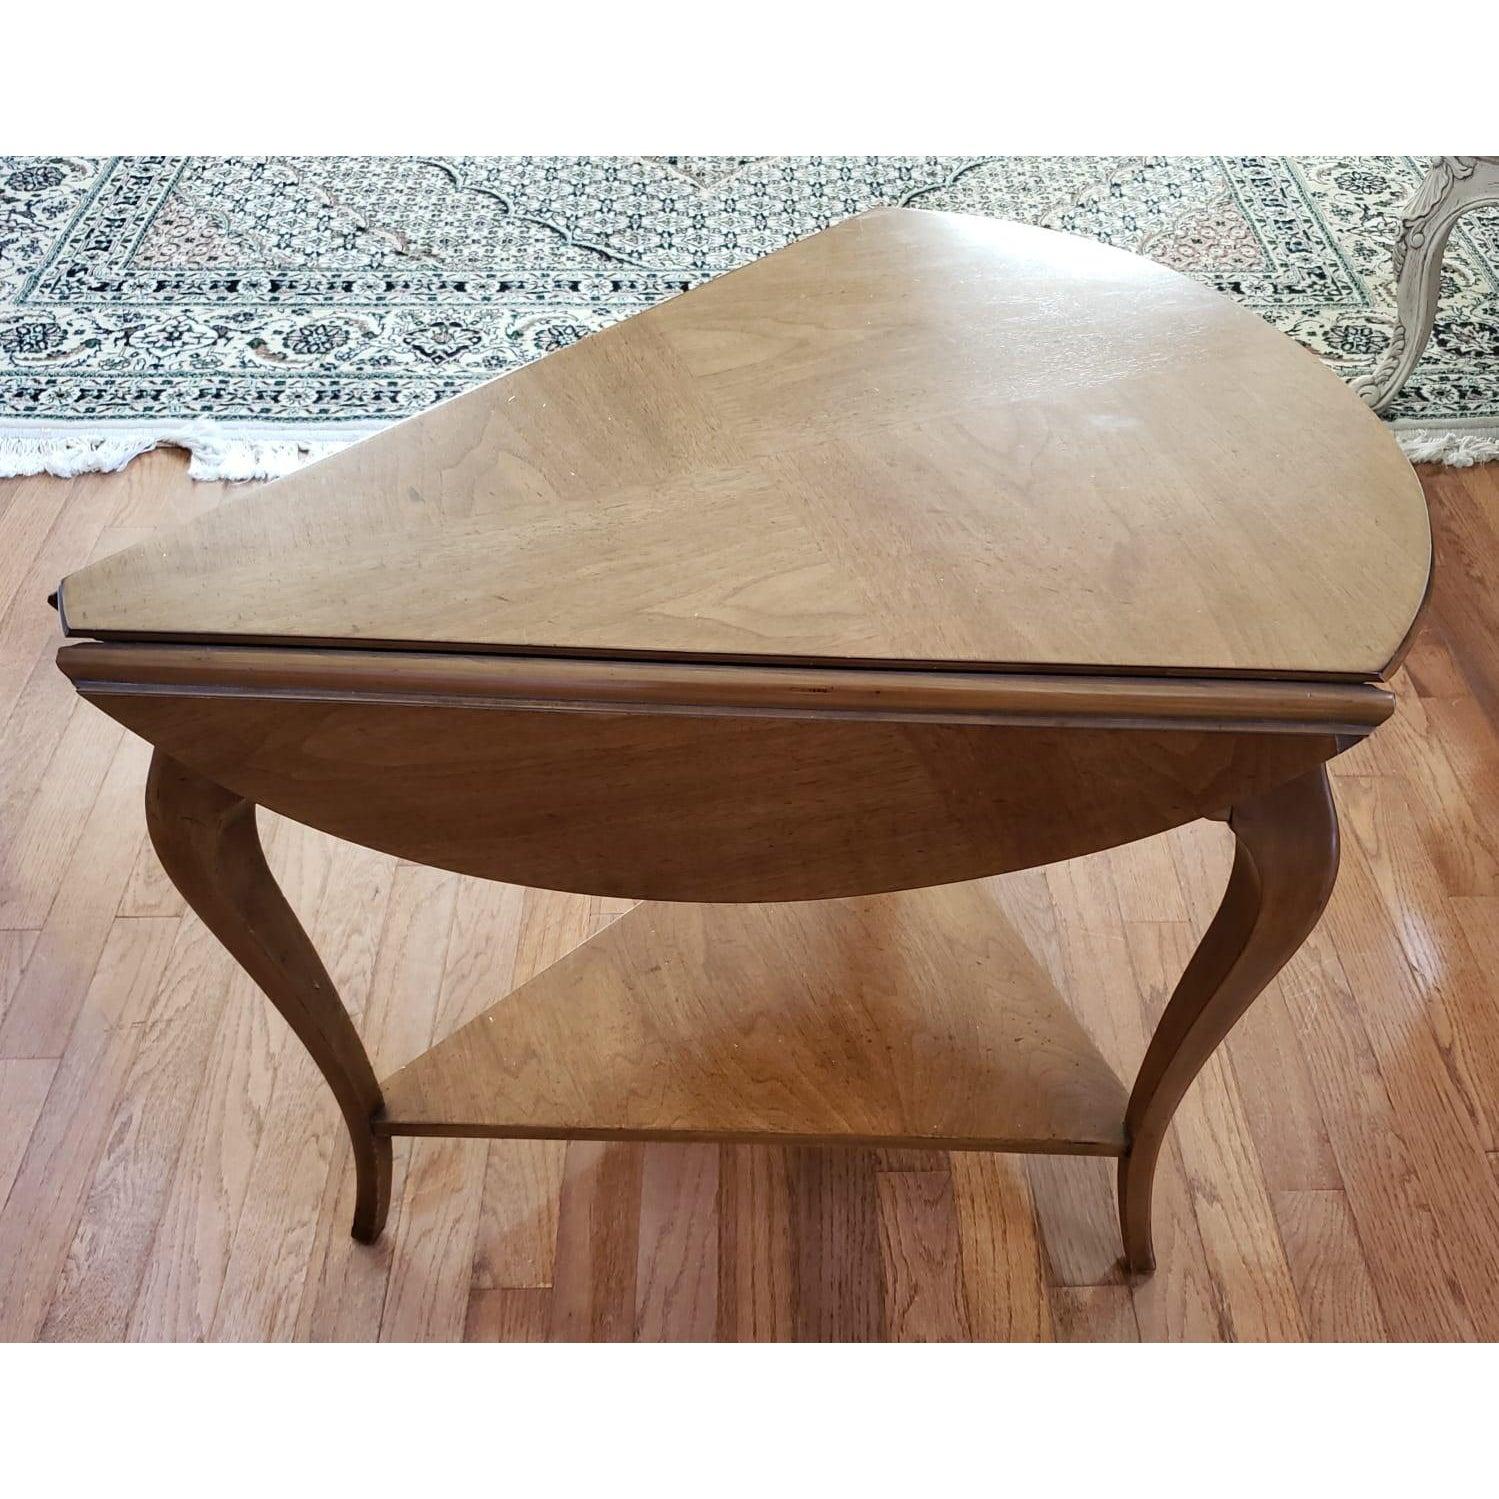 Two Tier John Widdicomb drop leaf walnut bookmtached veneer top accent table side table. Table Measures 25